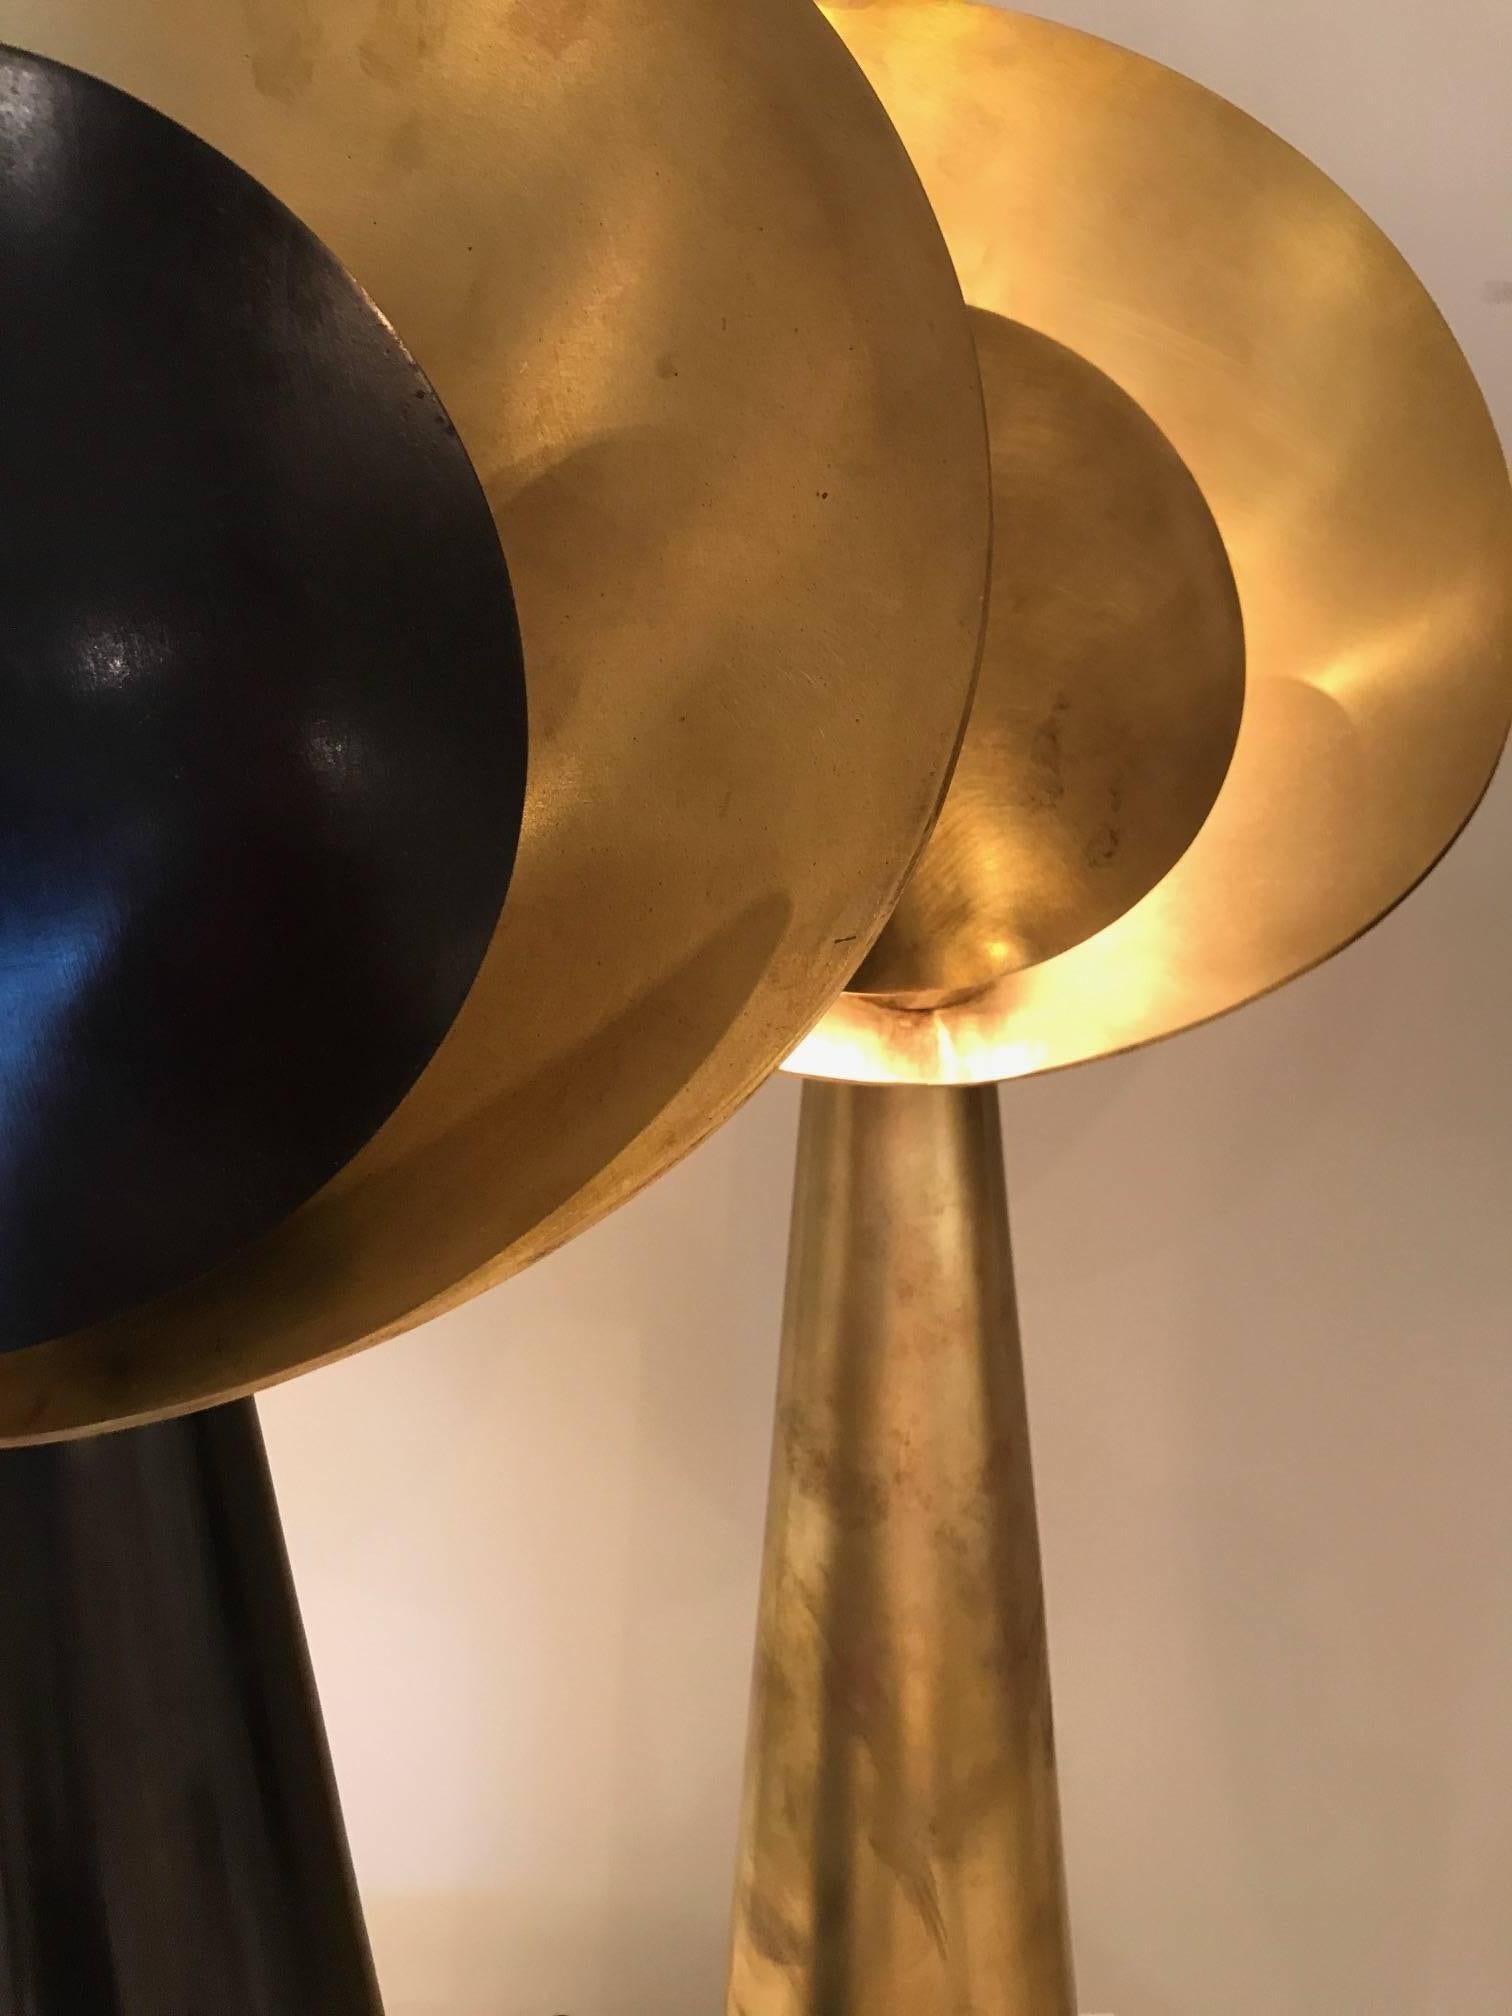 The Helios table lamp is handcrafted in the Paris atelier of Julien Barrault. Available in blackened brass with brass or brass on brass. Made-to-order.